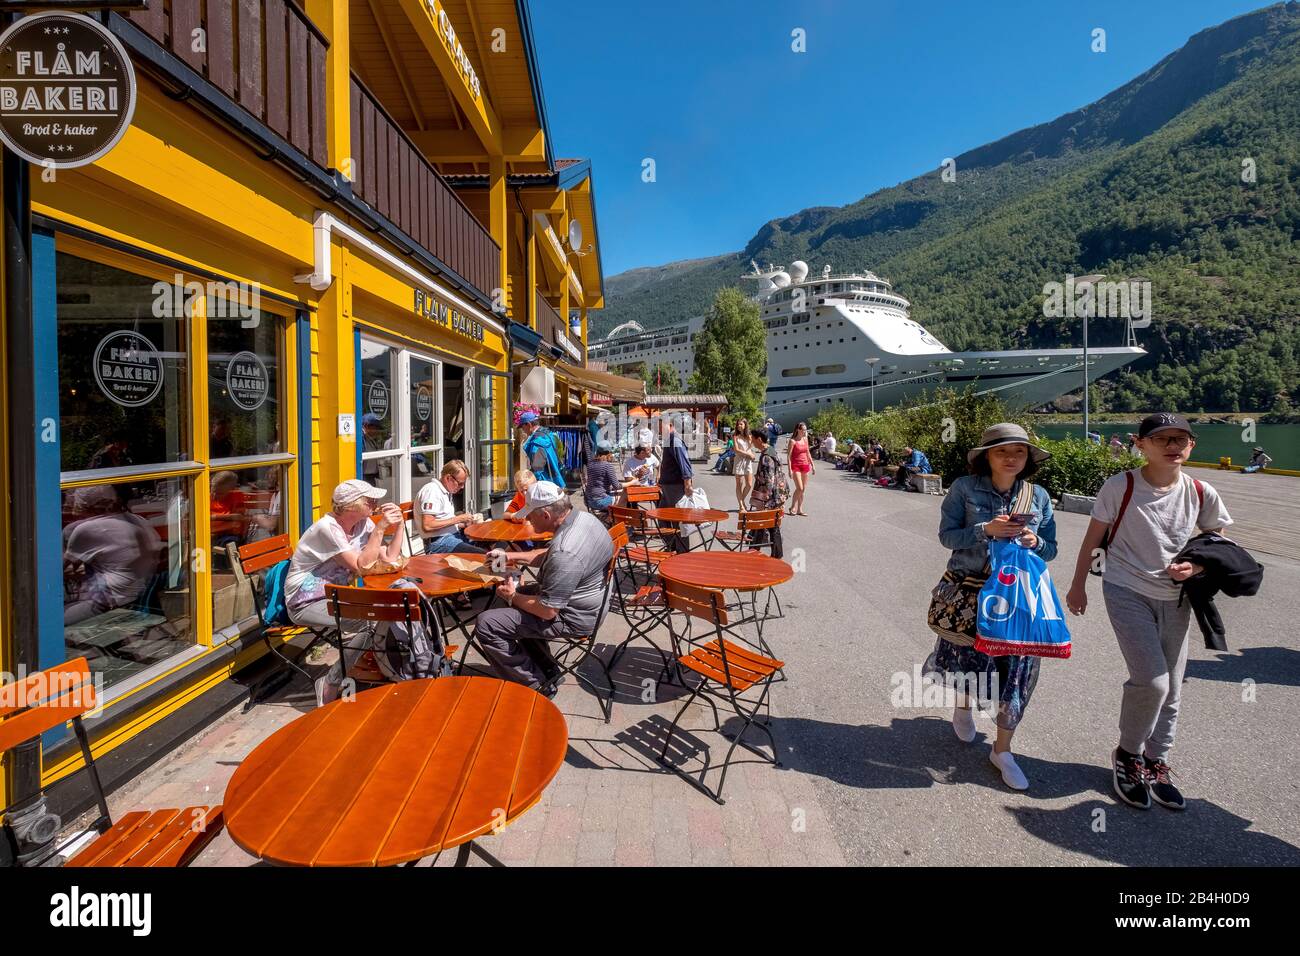 Tourists in Flåm, FACTORY KUTSALG FACTORY OUTLET, café, yellow wooden house, tour boat, fjord, mountain, trees, blue sky, Sogn og Fjordane, Norway, Scandinavia, Europe Stock Photo